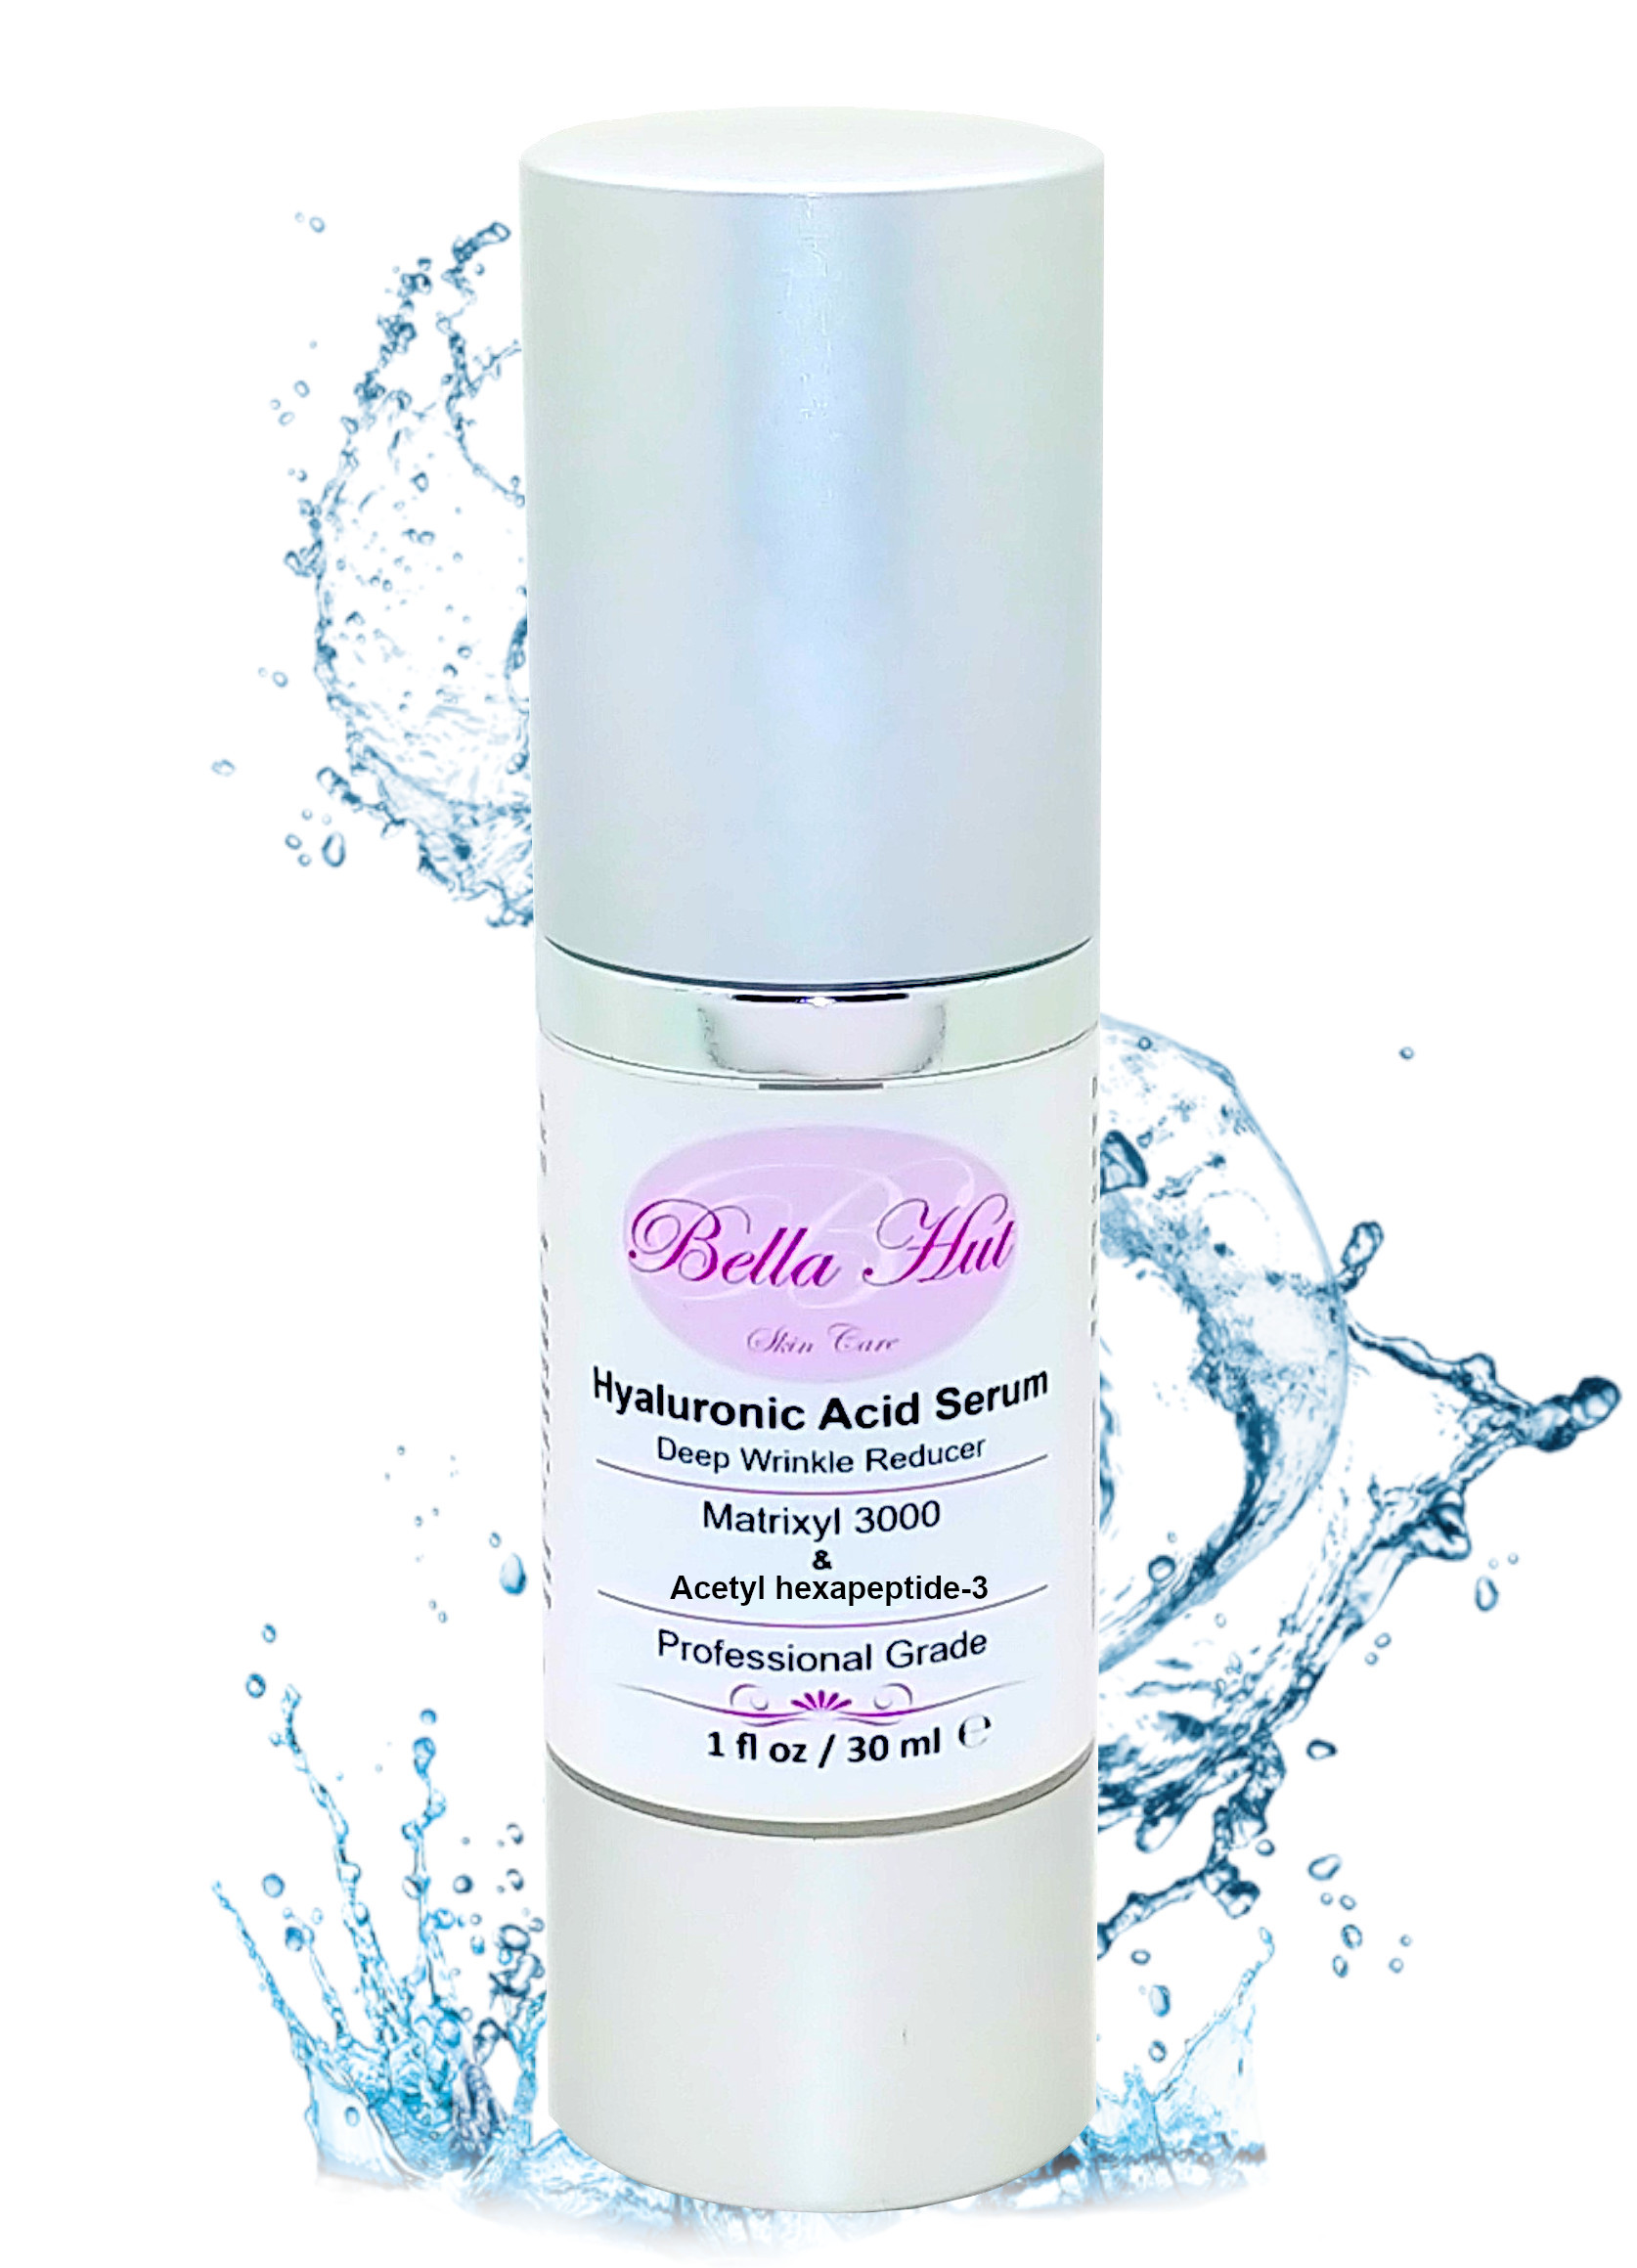 100% Hyaluronic Acid Serum with Matrixyl 3000 and Acetyl hexapeptide-3 Wrinkle Reduction